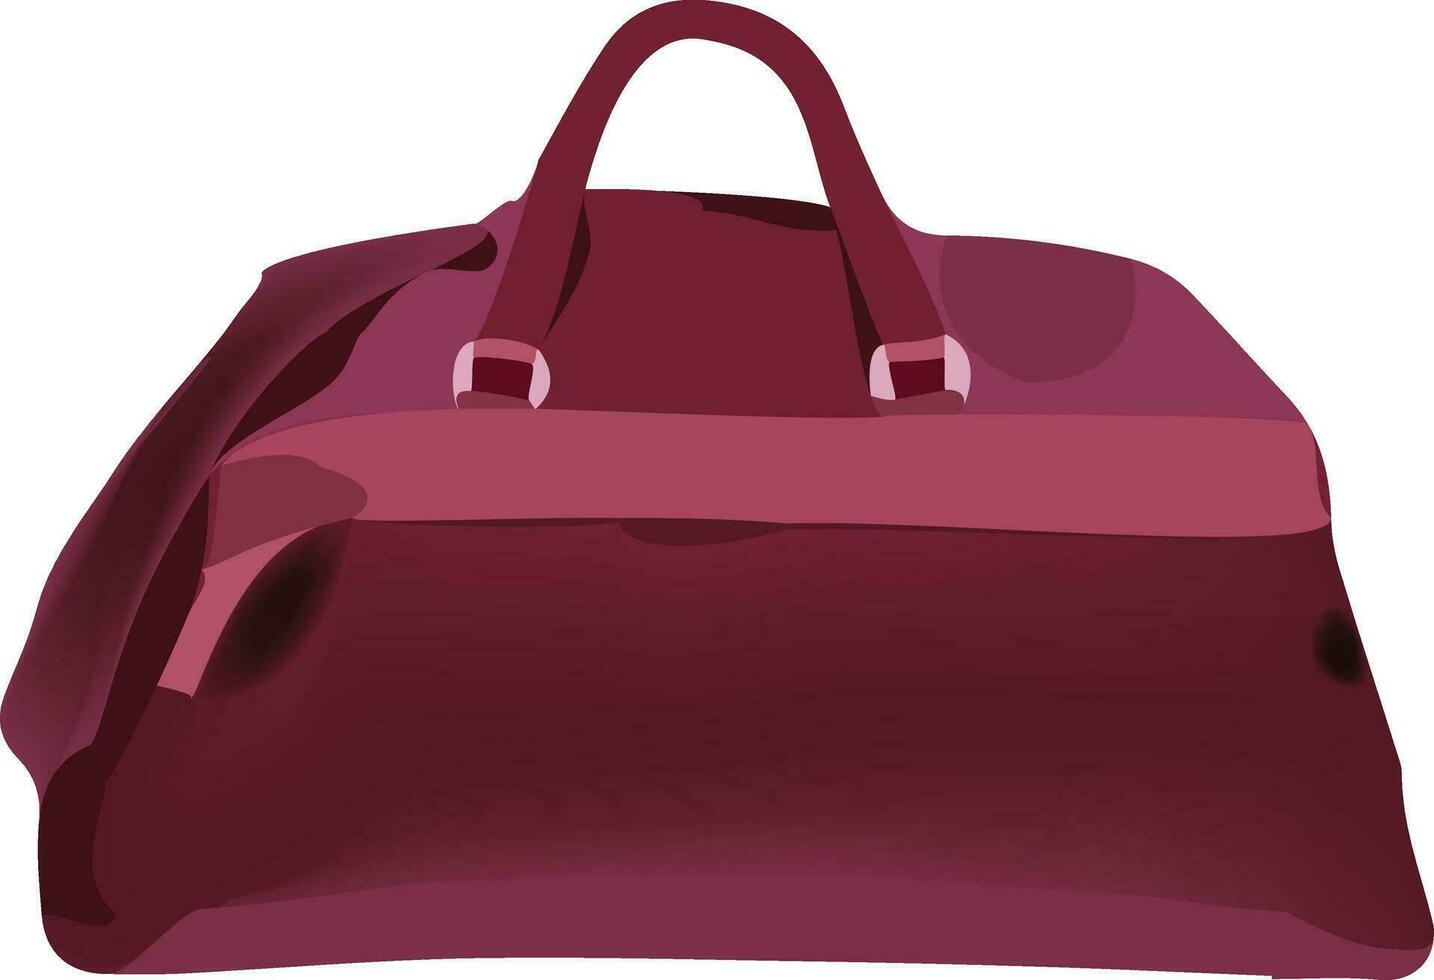 Capacious travel bag in red color- vector